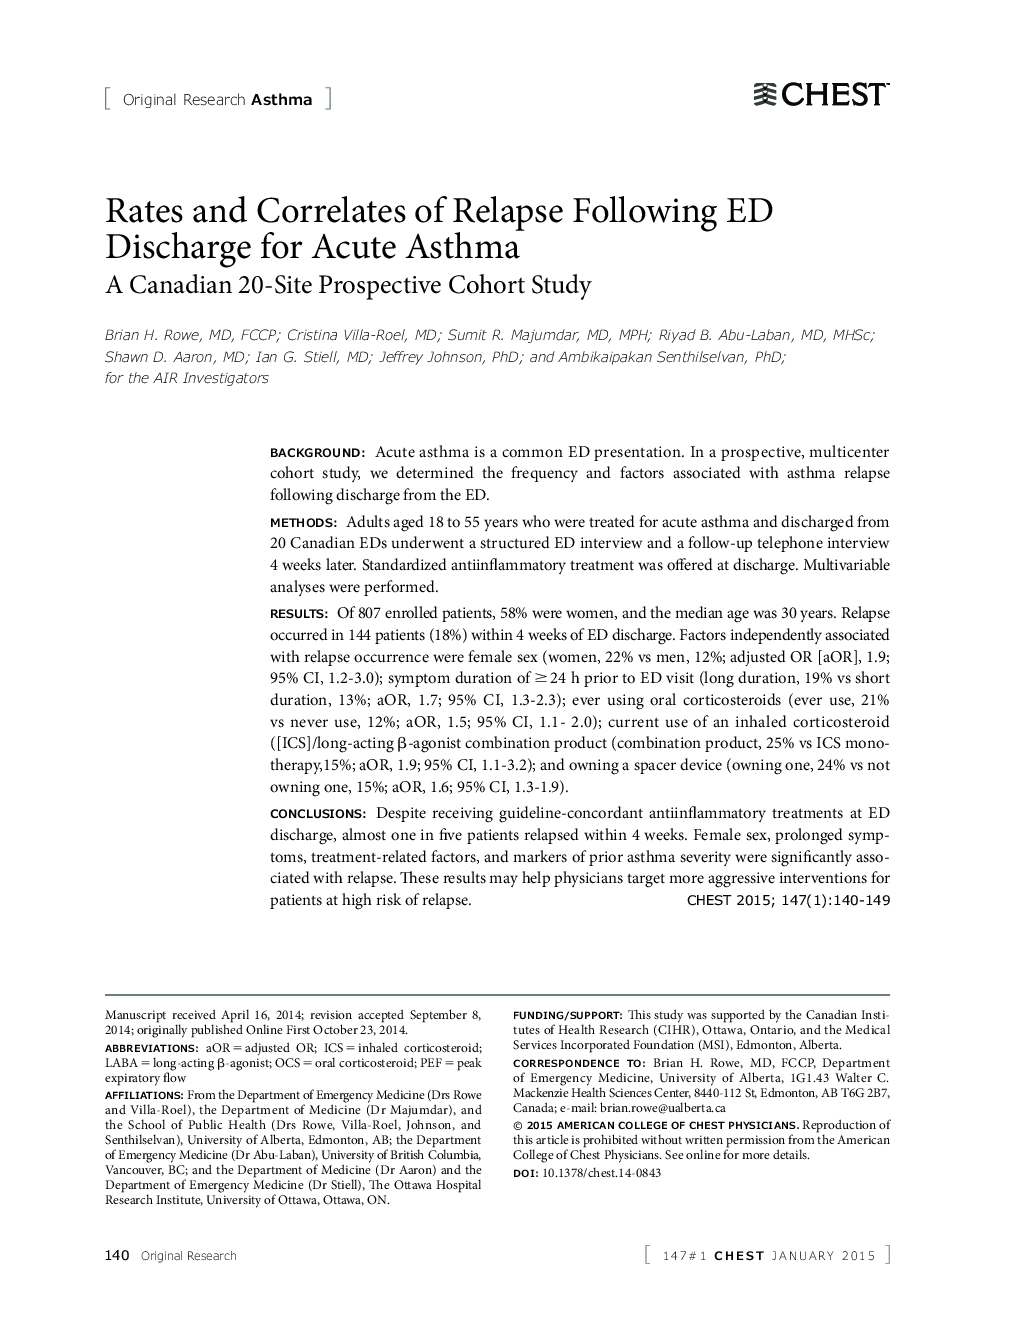 Rates and Correlates of Relapse Following ED Discharge for Acute Asthma